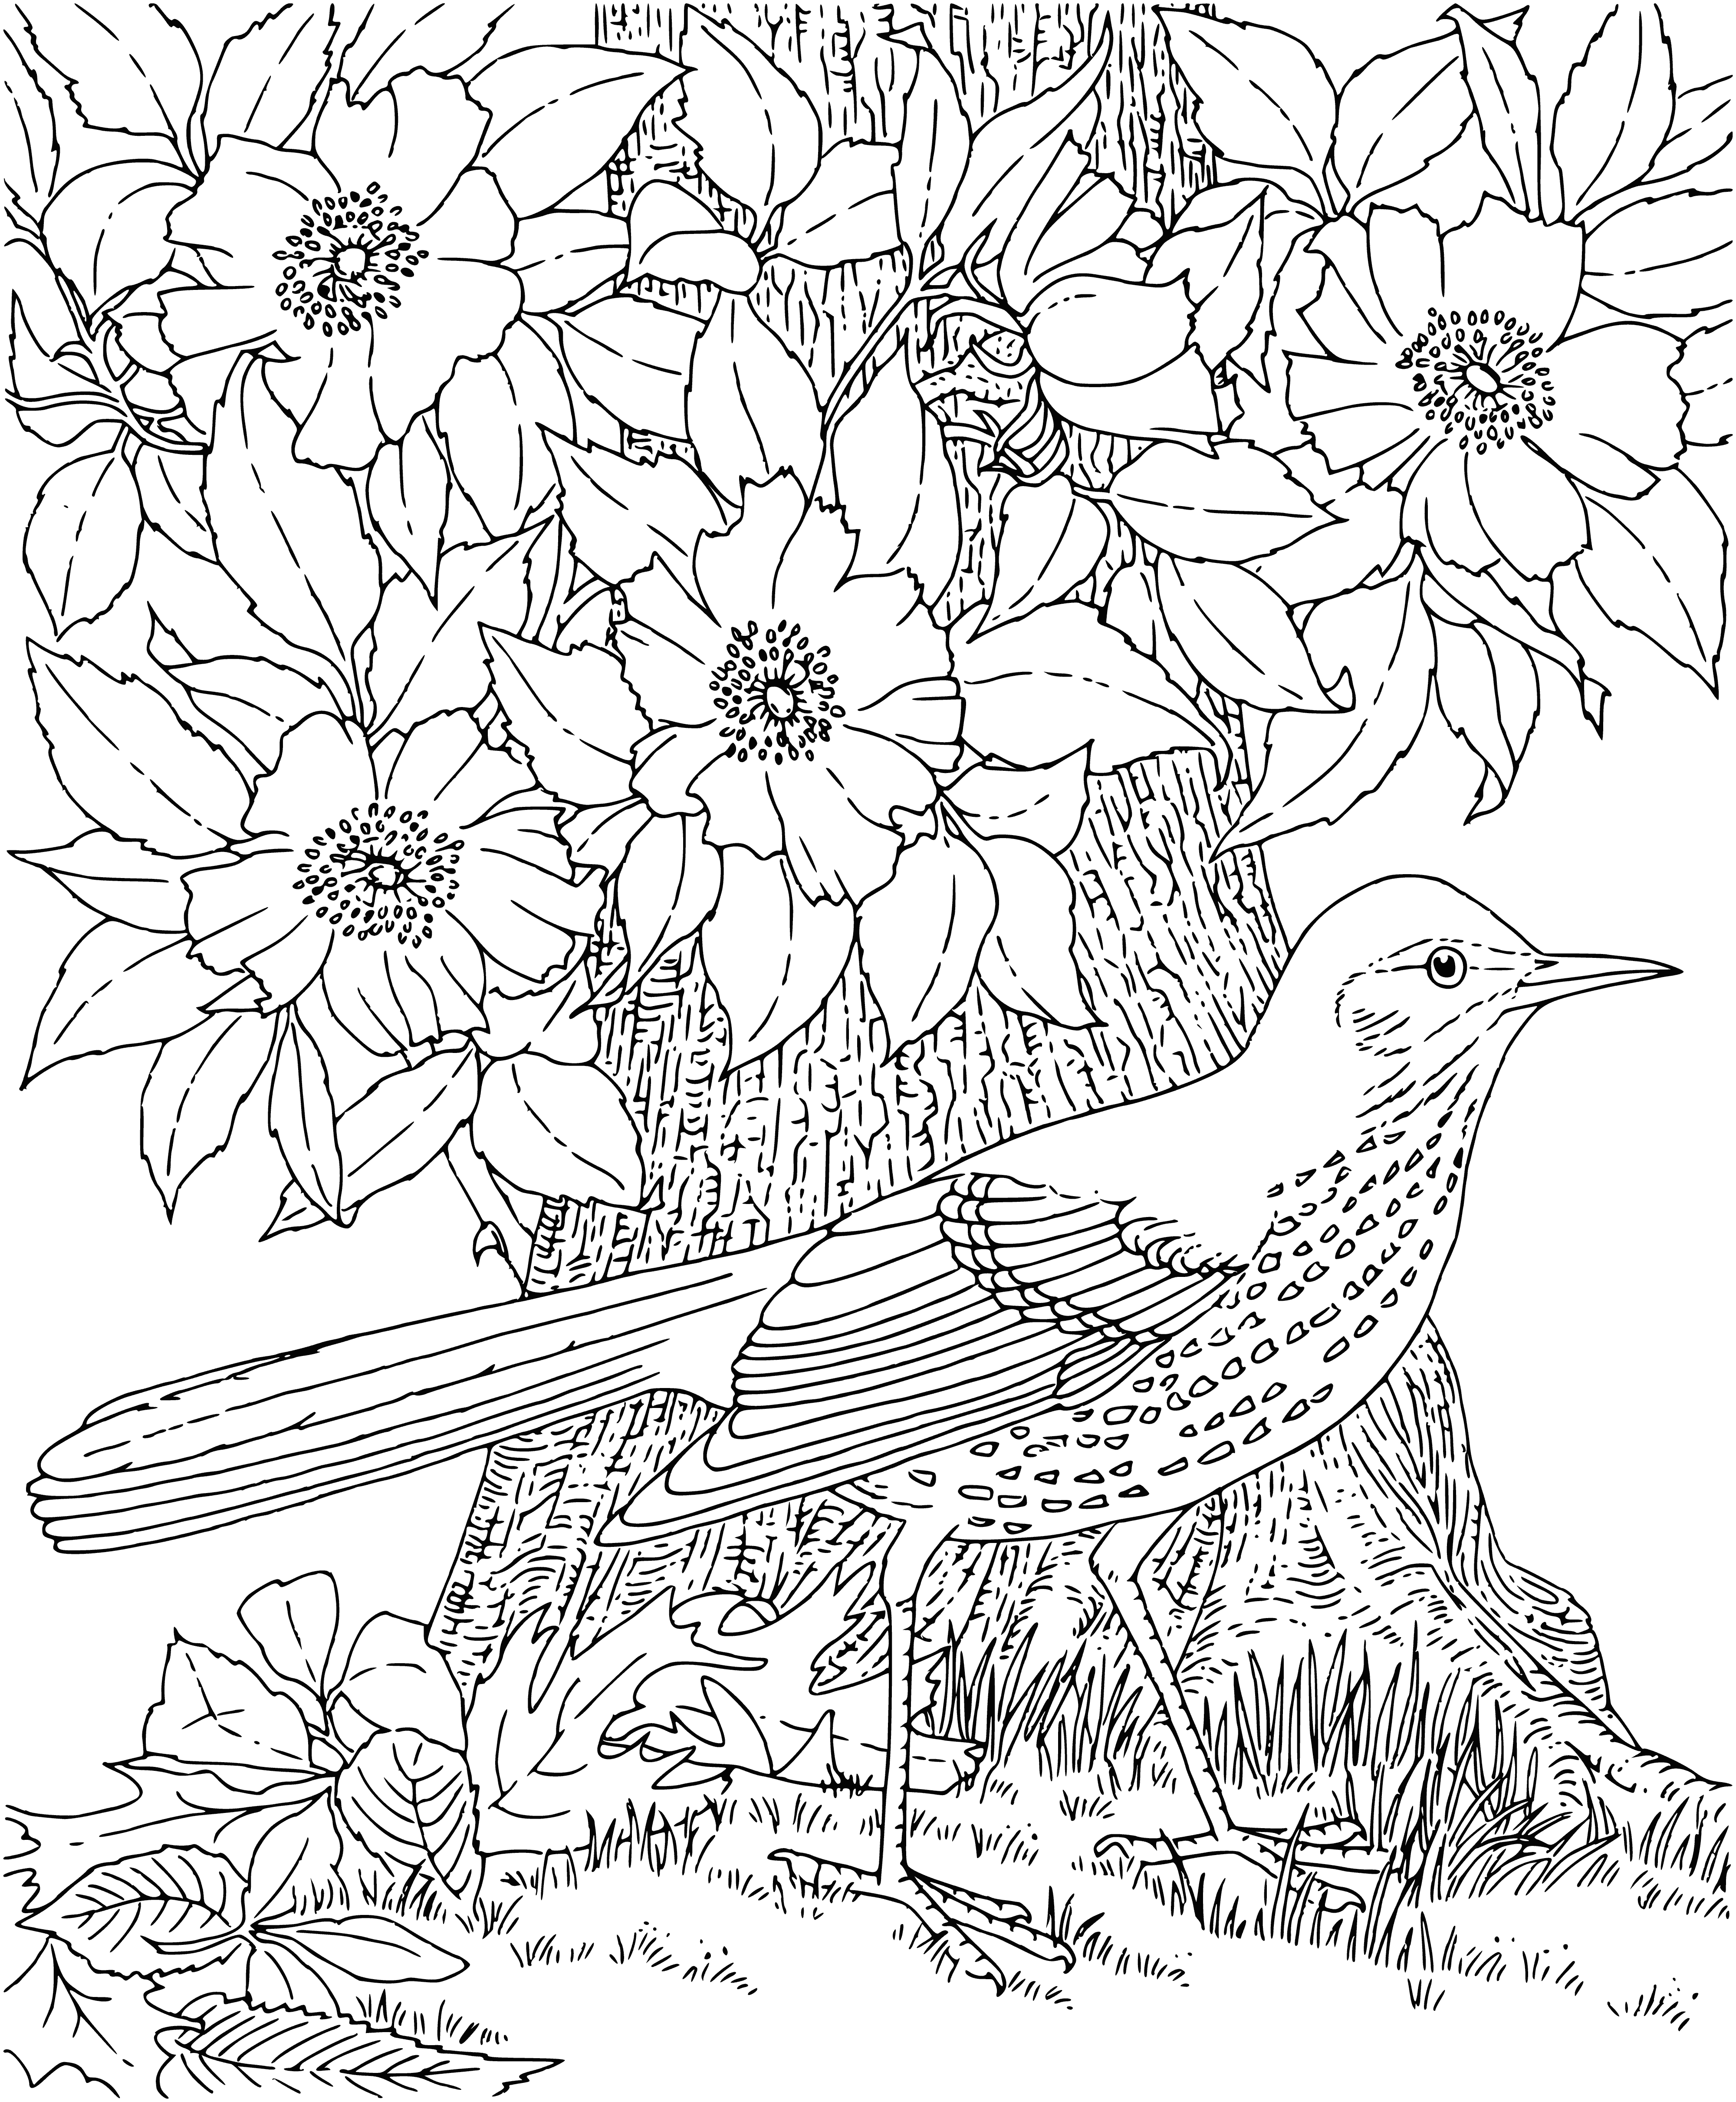 coloring page: Bird perched on branch with checkerboard back, black and white striped tail and small black eyes. #birdwatching